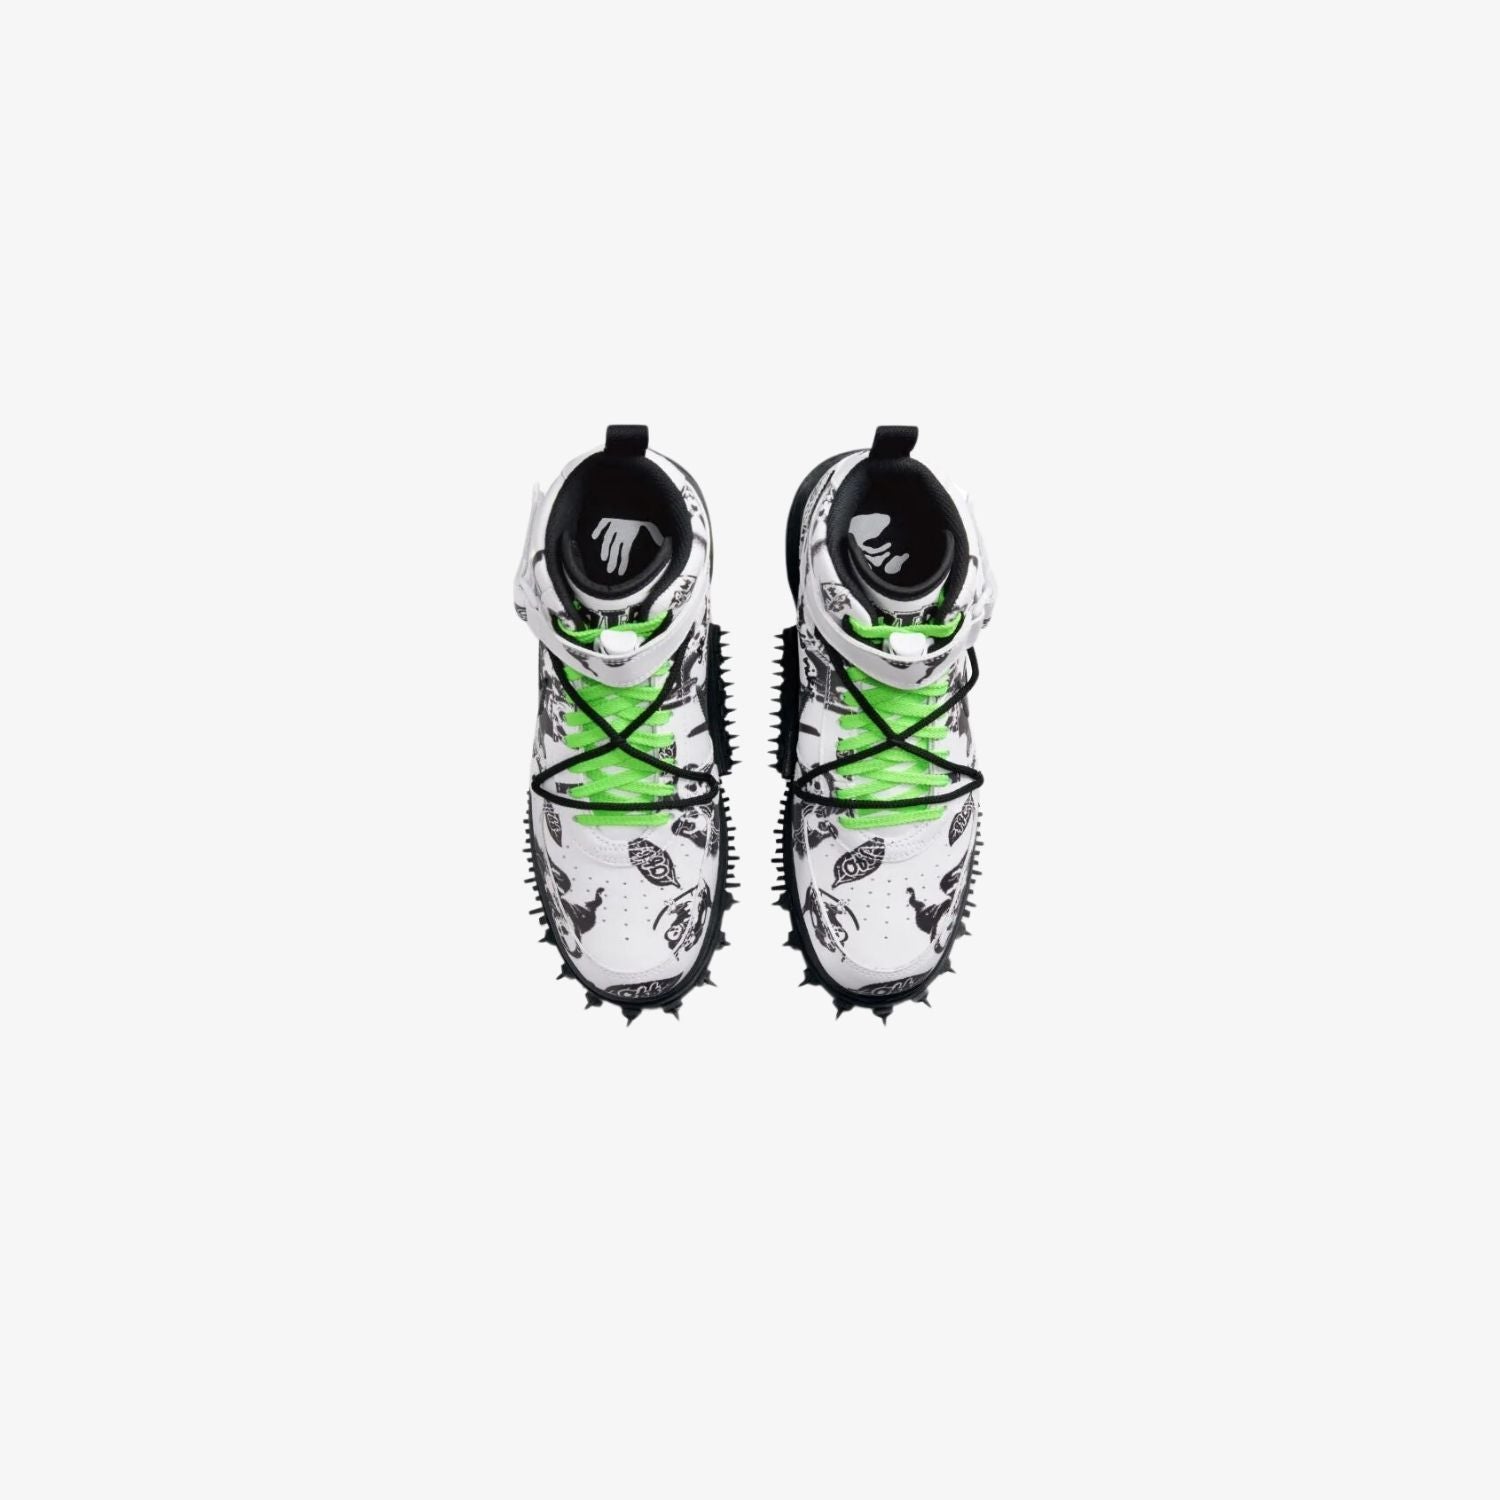 off-white-nike-air-force-1-mid-green-reaper-unfazed-3